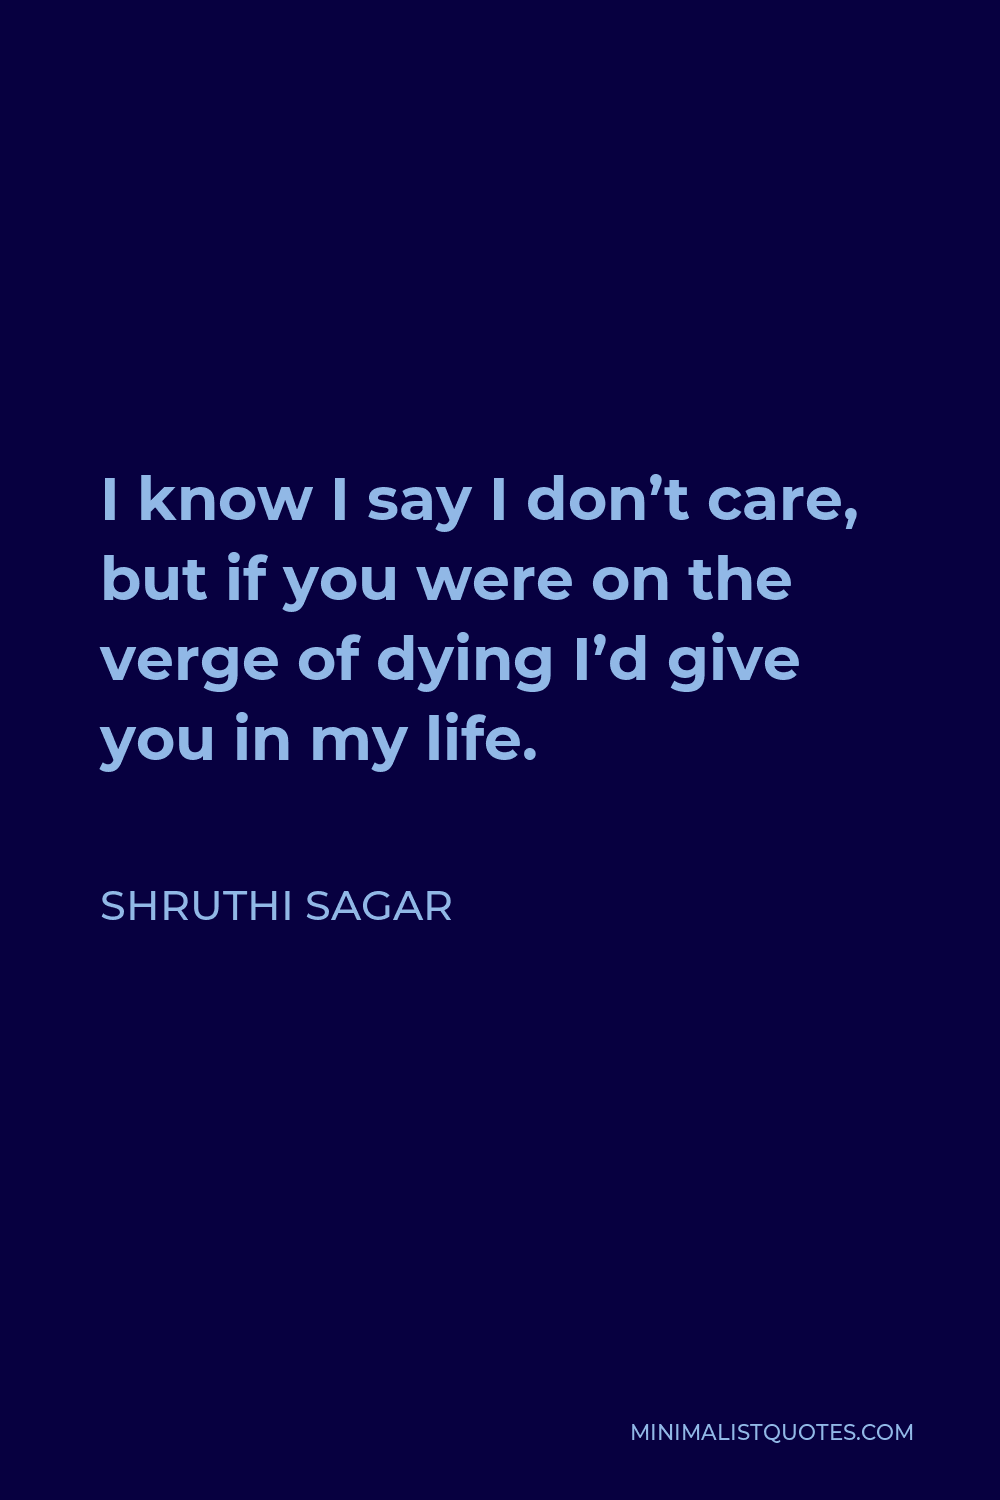 Shruthi Sagar Quote - I know i say i don’t care, but if you were on the verge of dying i’d give you my life.